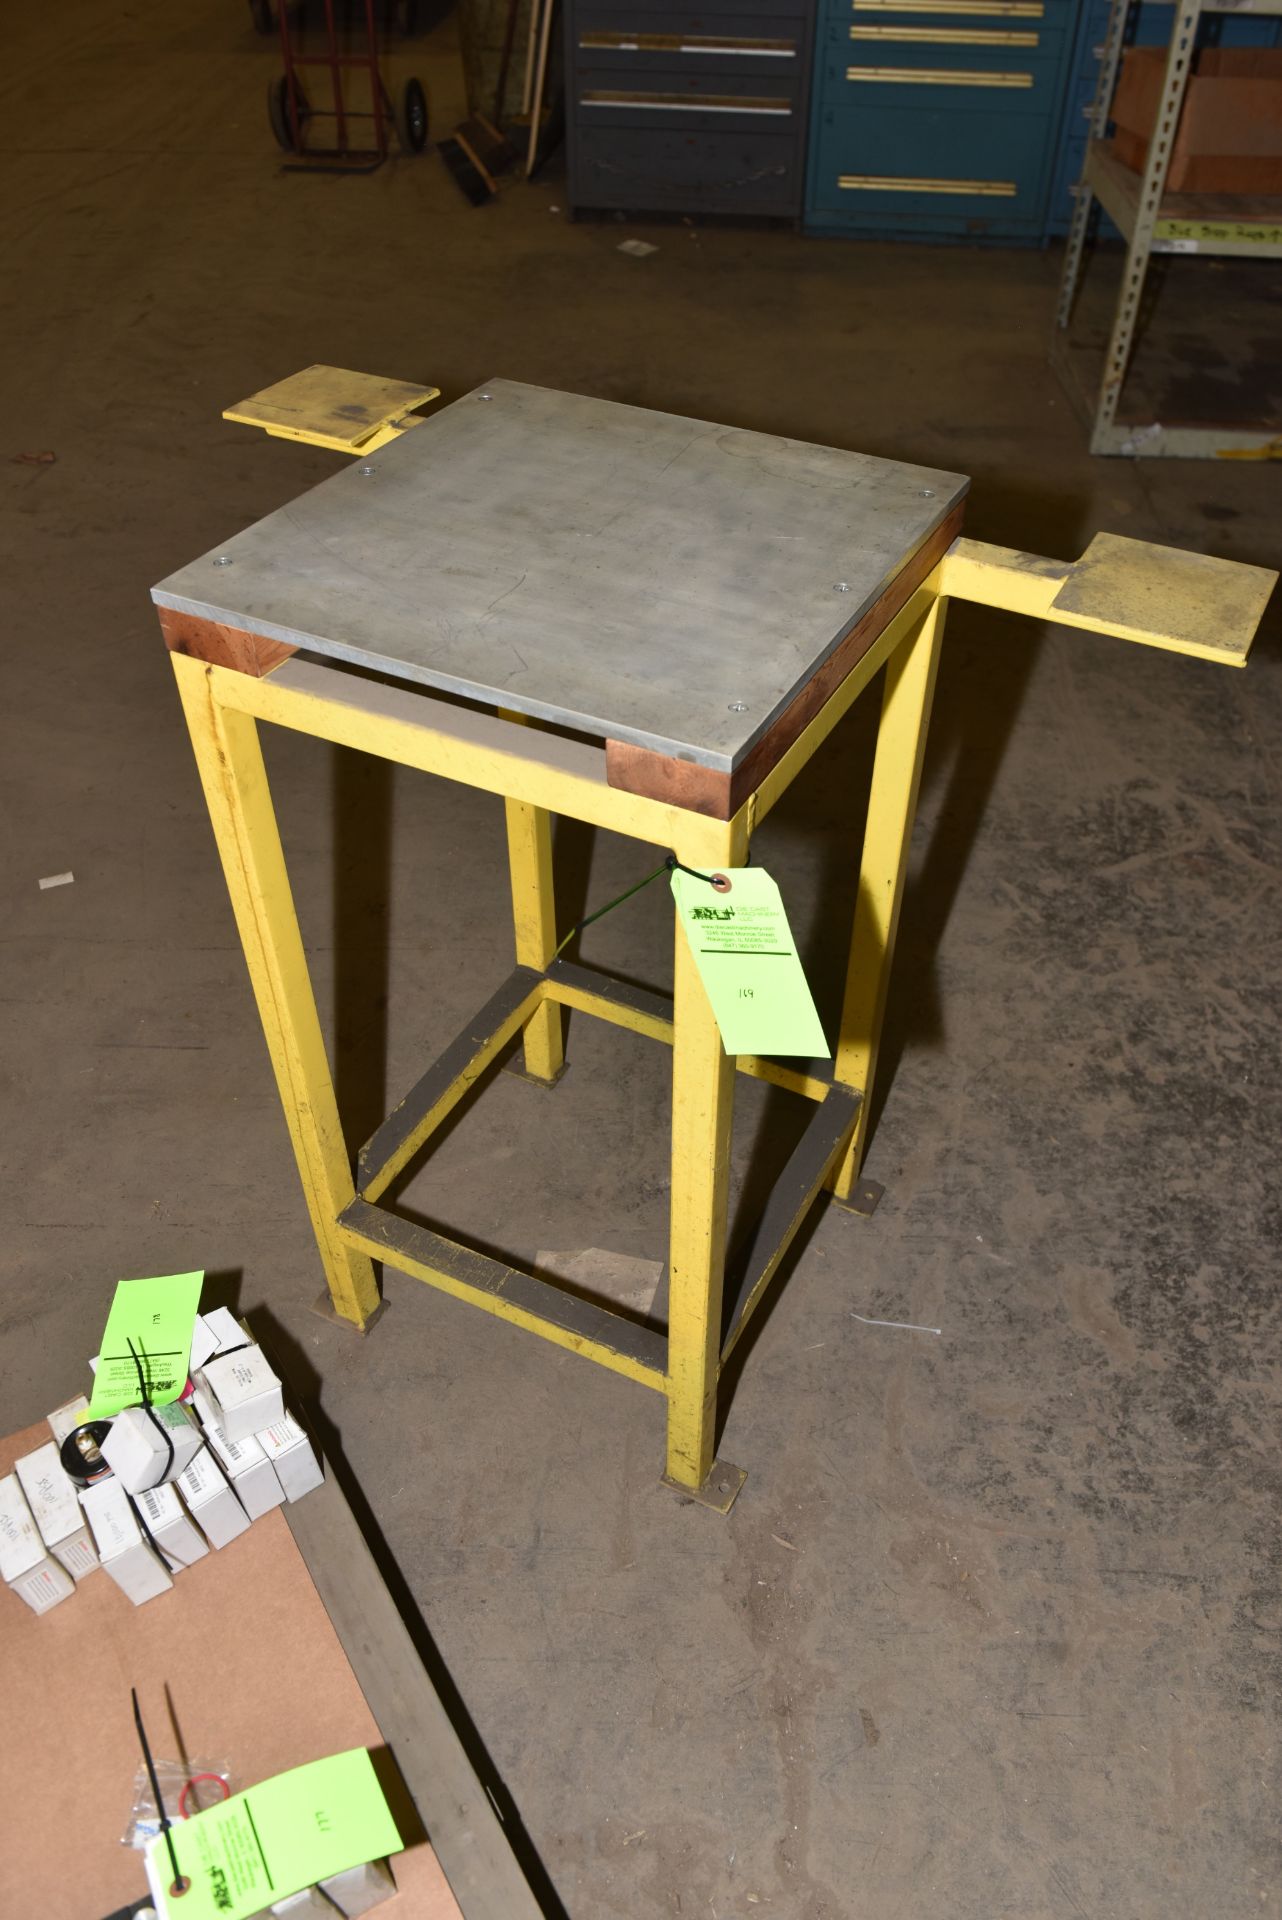 18" x 18" x 36" Inspection Table